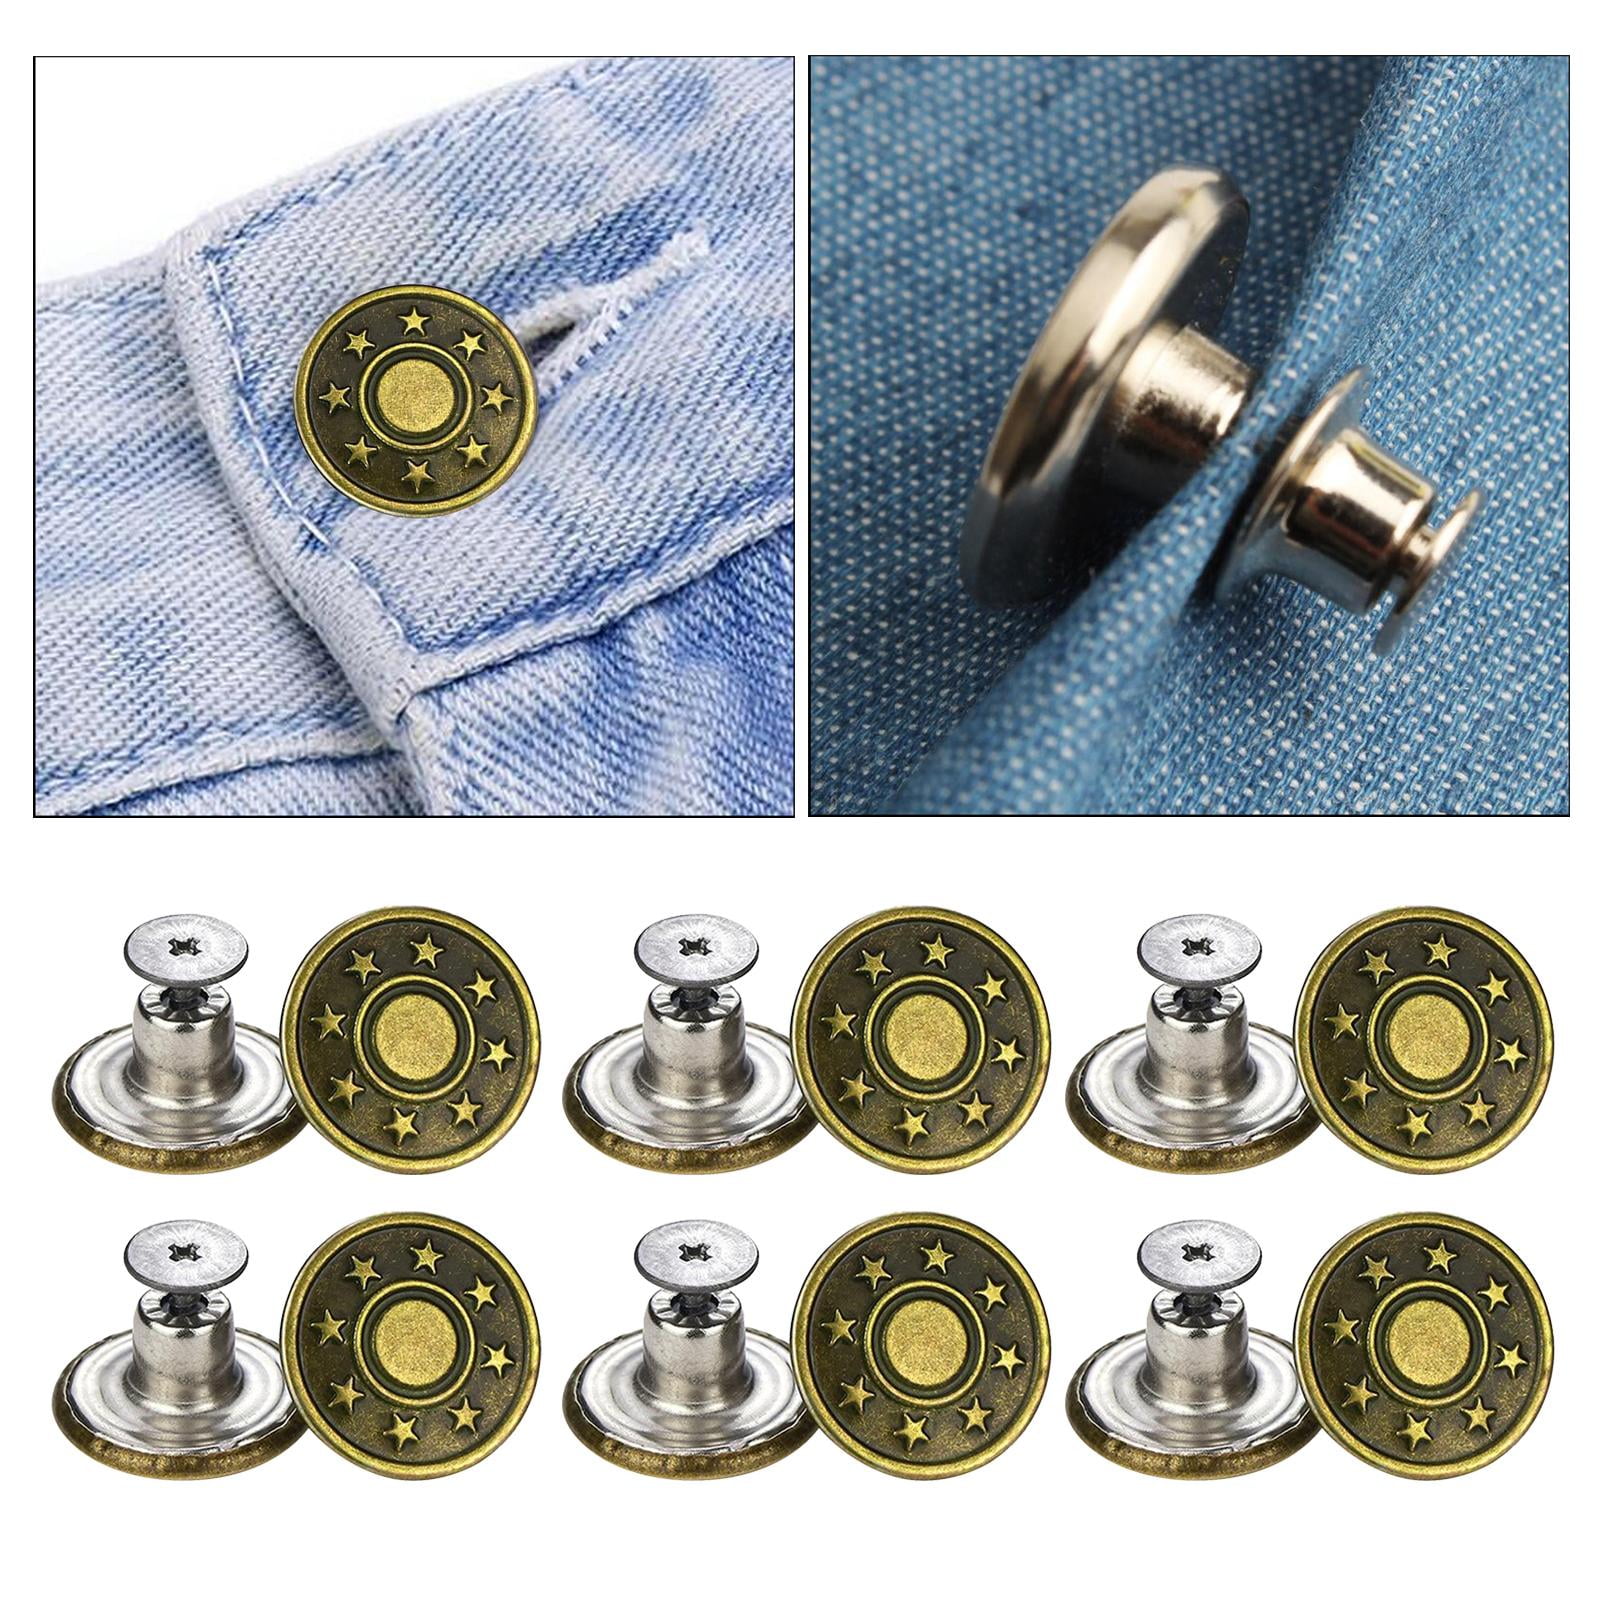 Jean Buttons Pins, 9 Pcs Adjustable Pants Button Tightener, 17mm No Sew  Metal Instant Buttons Replacement to Size Down Waist (Silver/Bronze) 